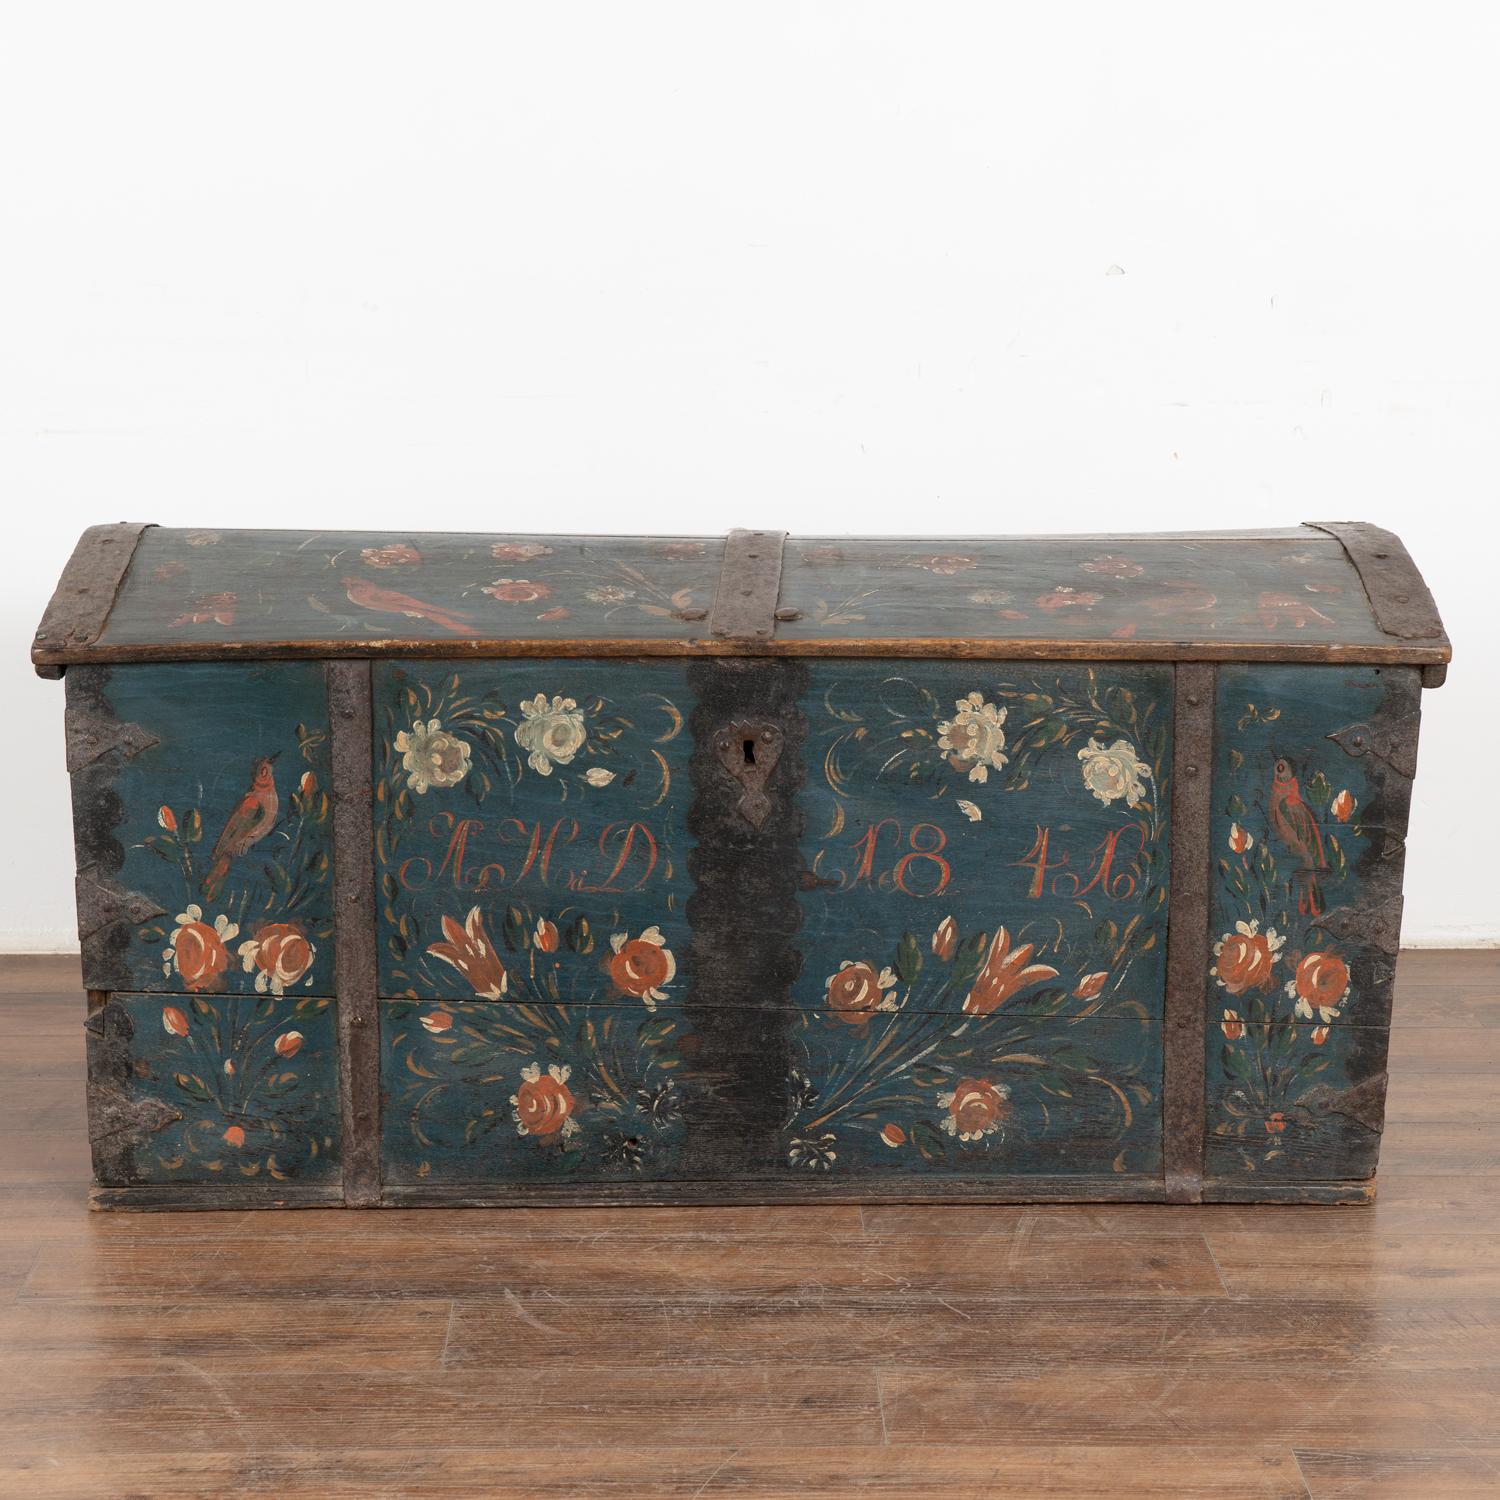 Original Painted Blue Dome Top Trunk with Birds and Flowers, Sweden dated 1841 For Sale 1